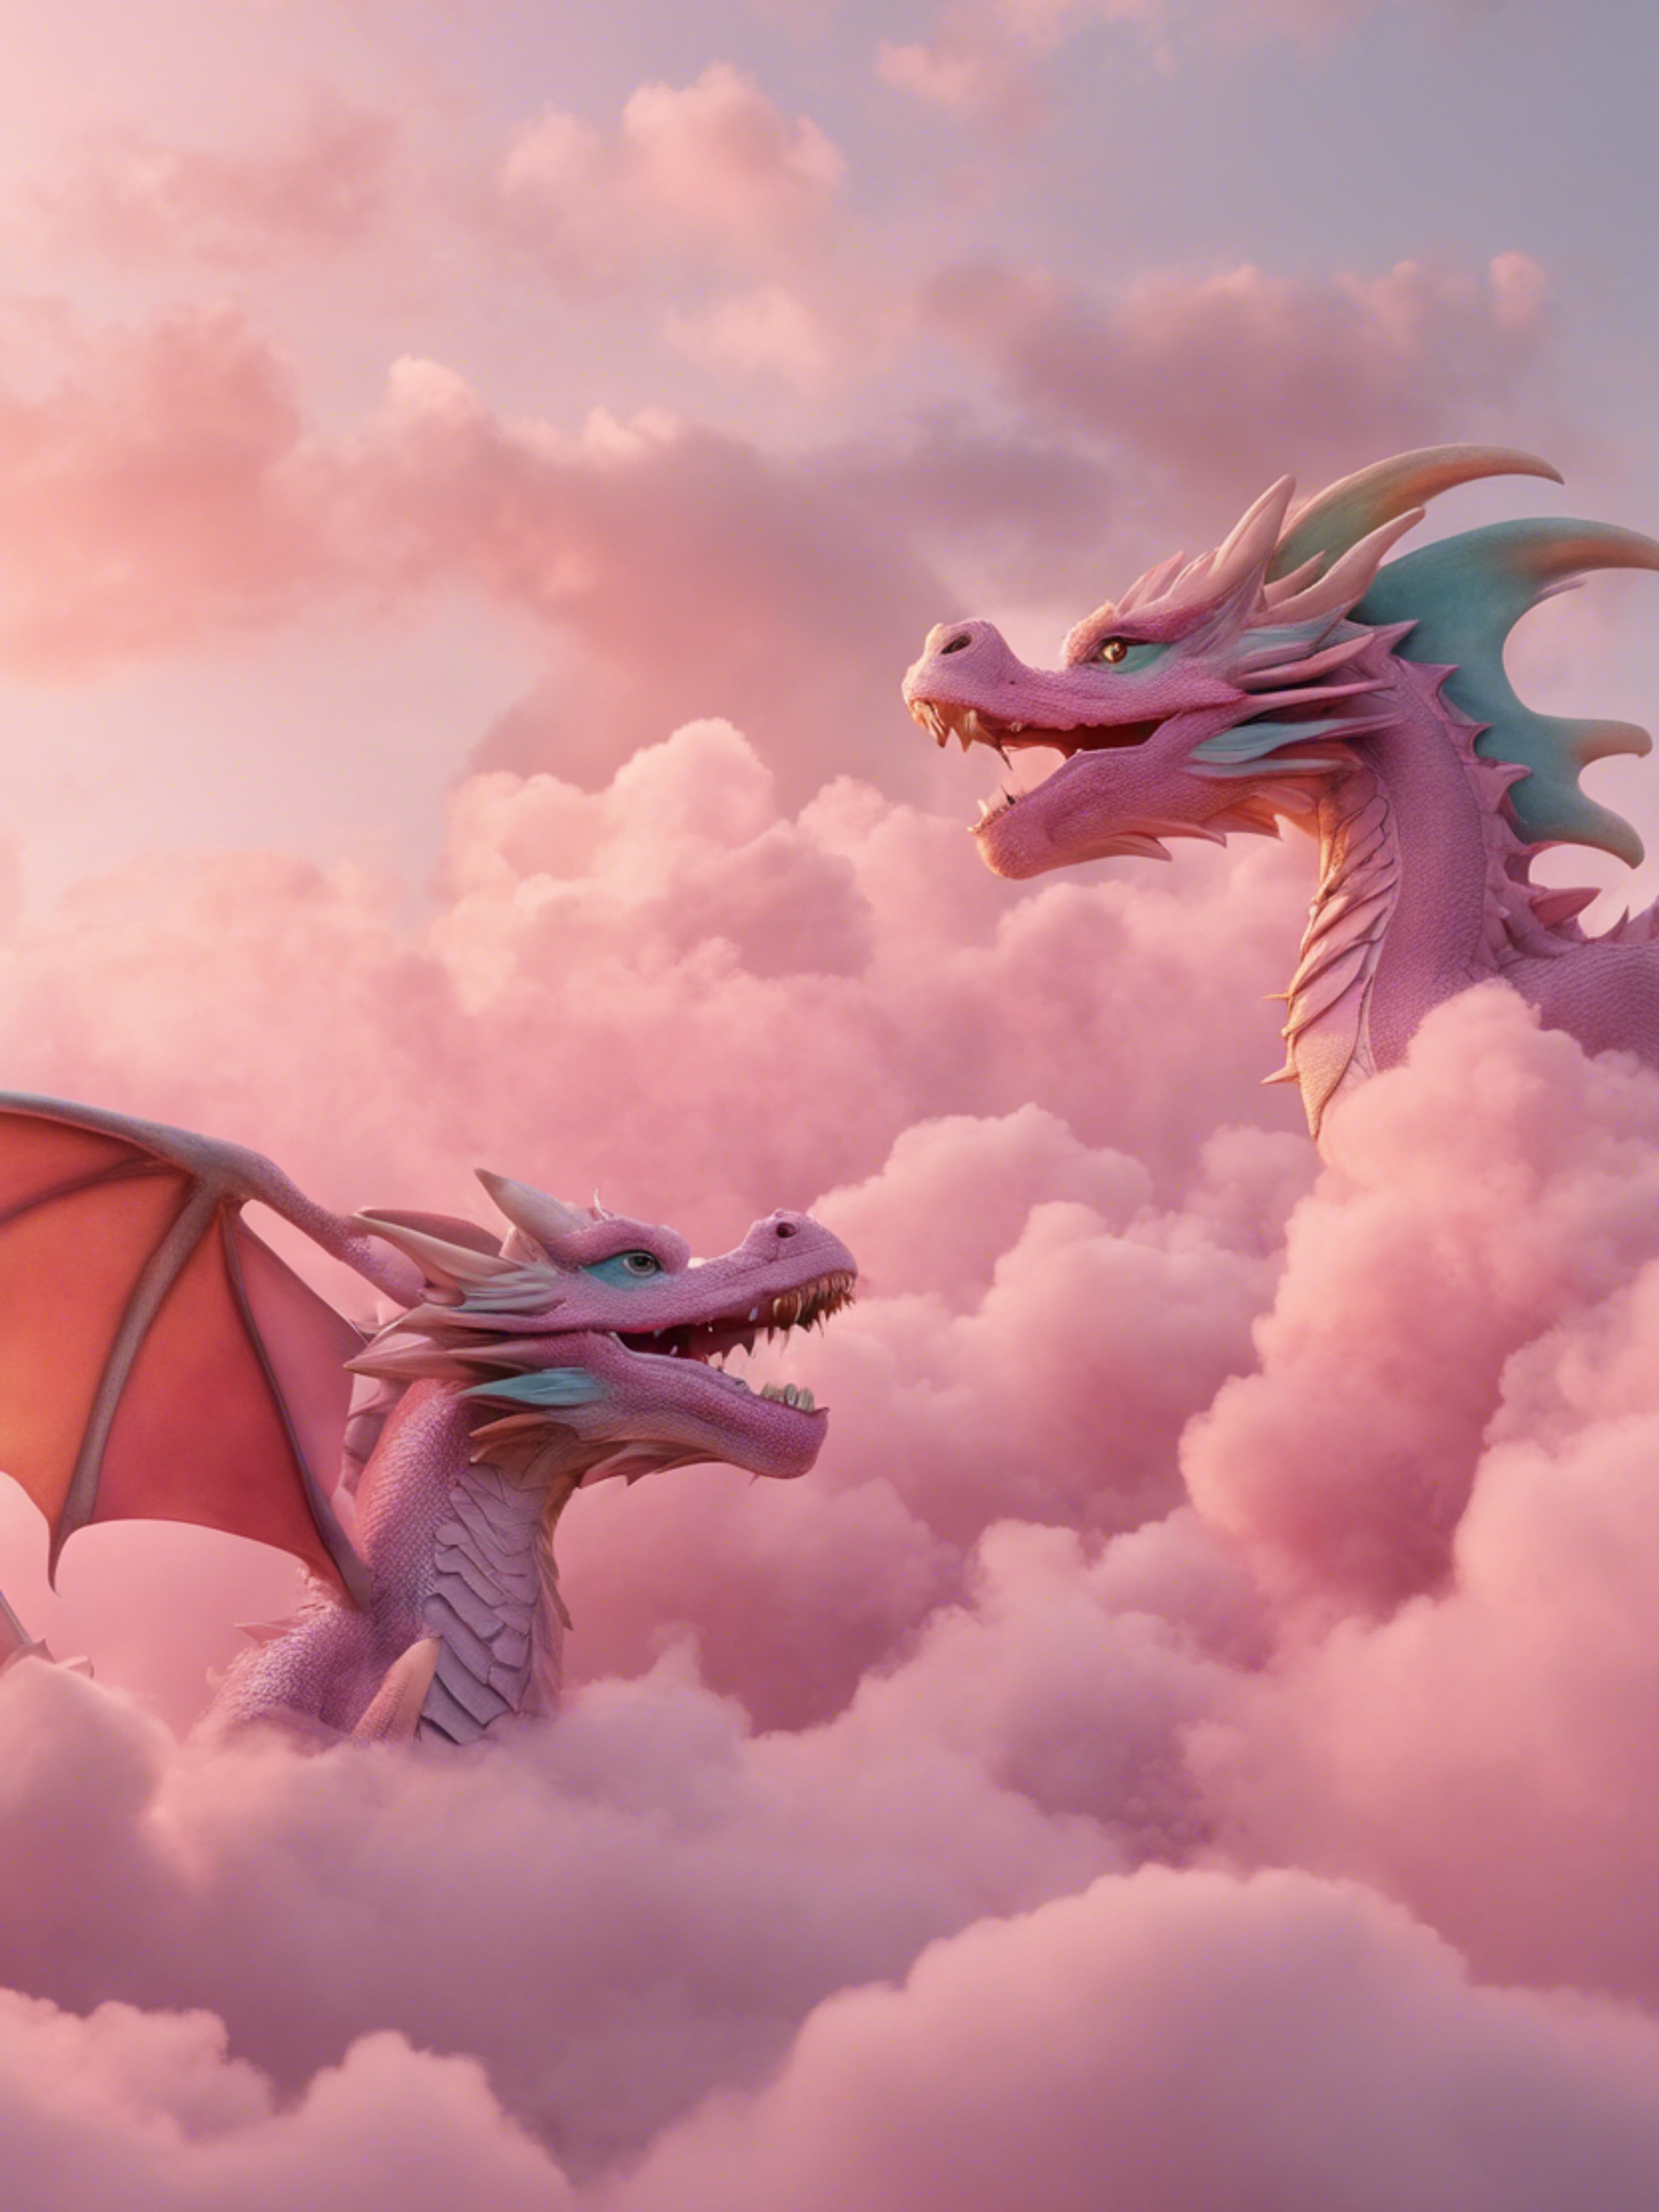 Trio of playful pastel-colored dragons flitting among fluffy pink clouds during sunrise. ផ្ទាំង​រូបភាព[e1ca69721ca941939a18]